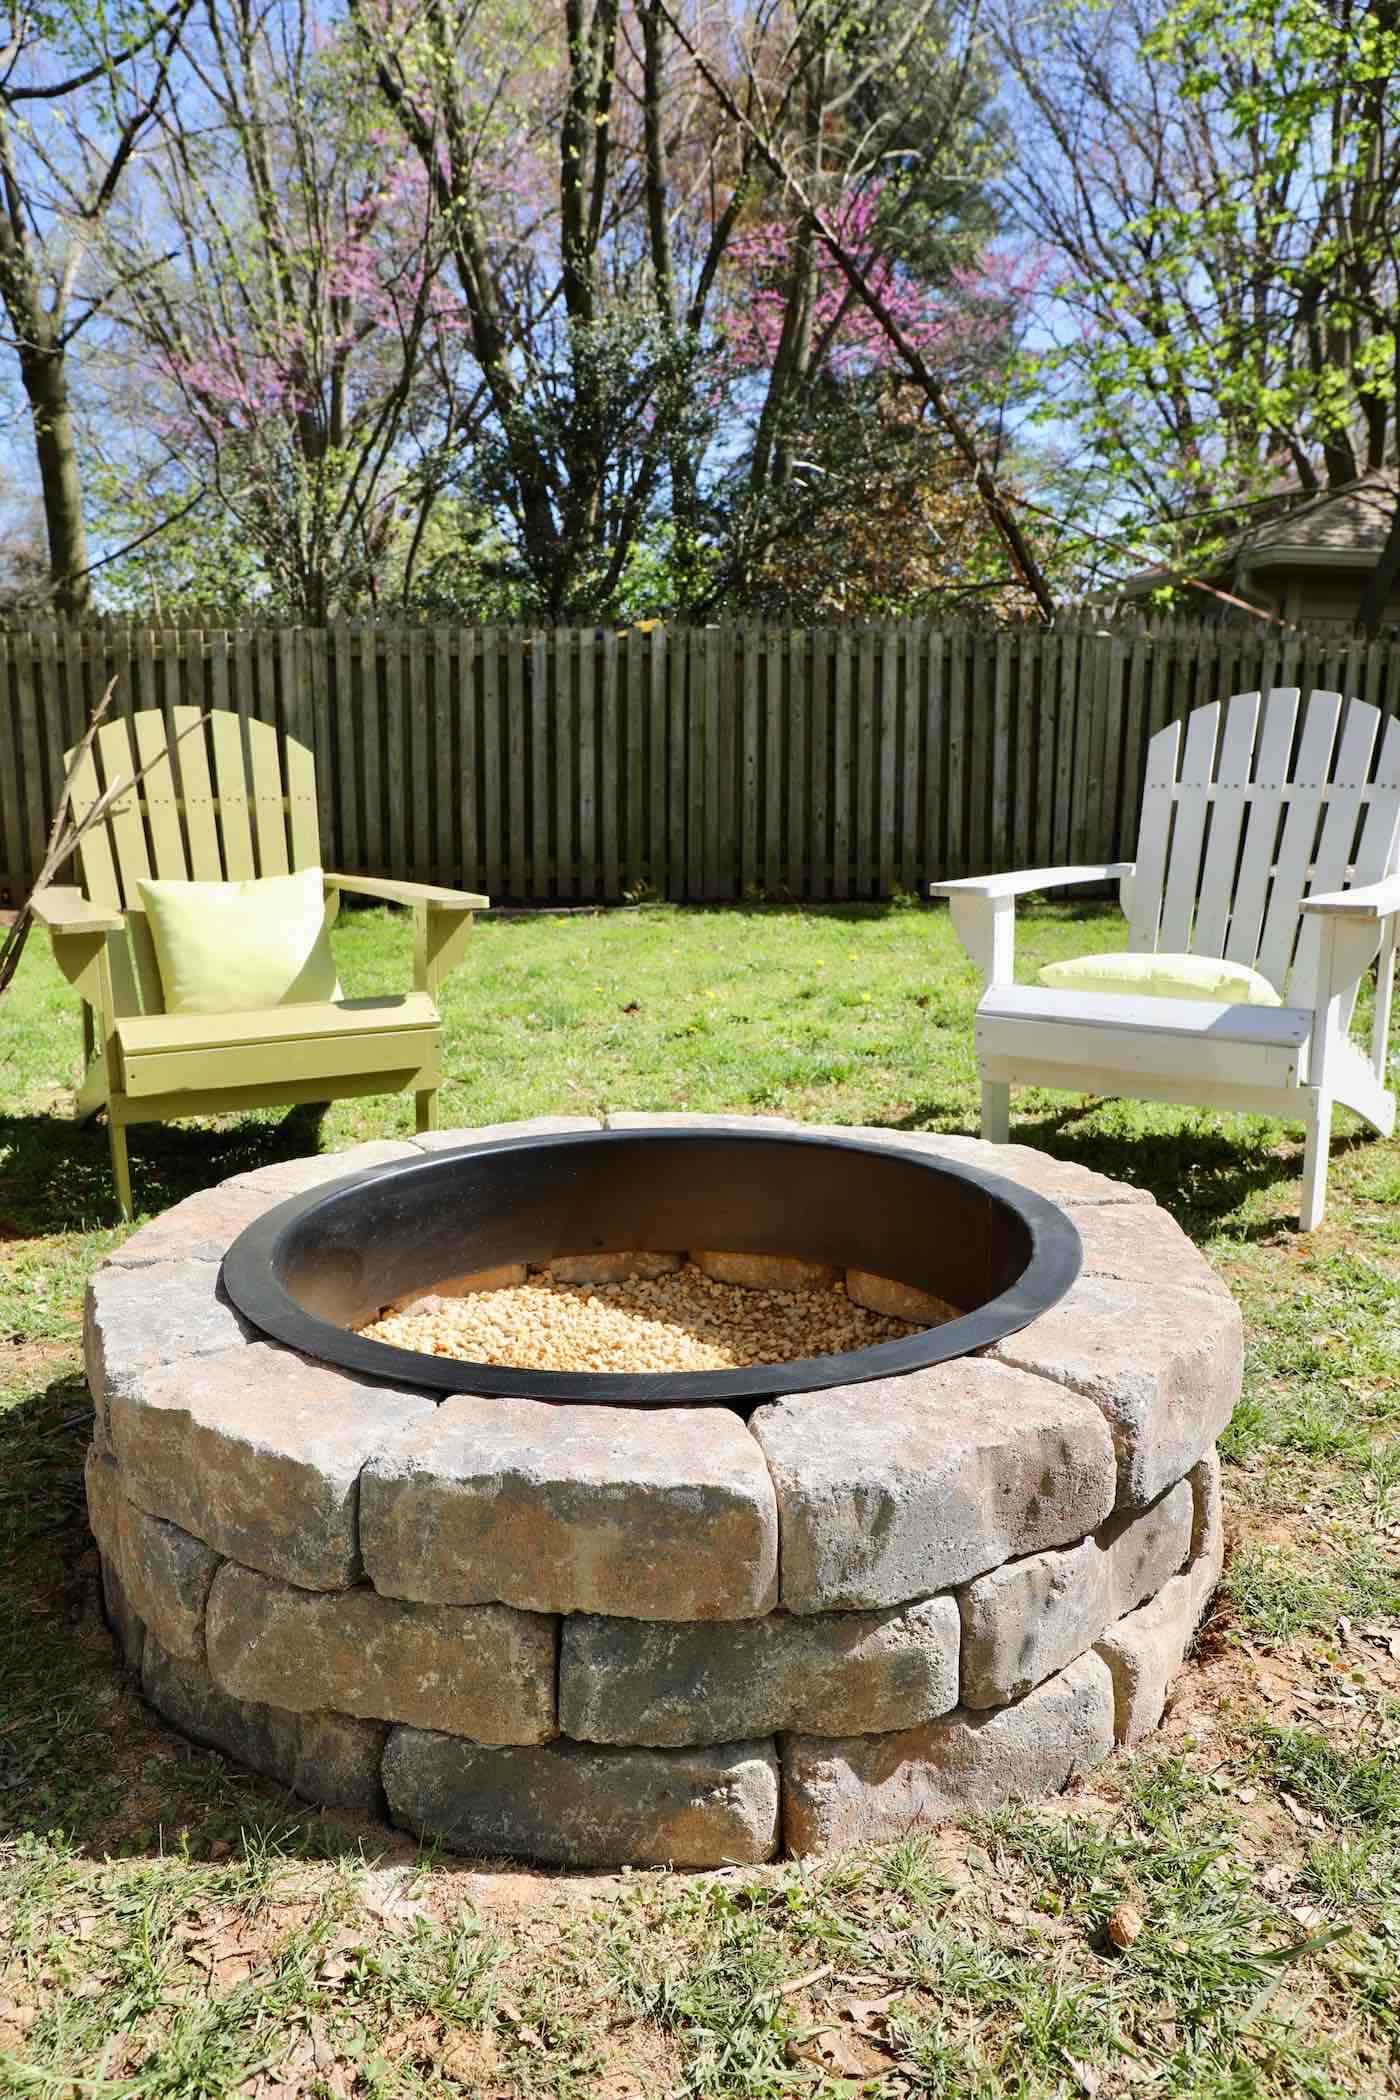 Diy Fire Pit With Gravel Stones, Brick Fire Pits Images